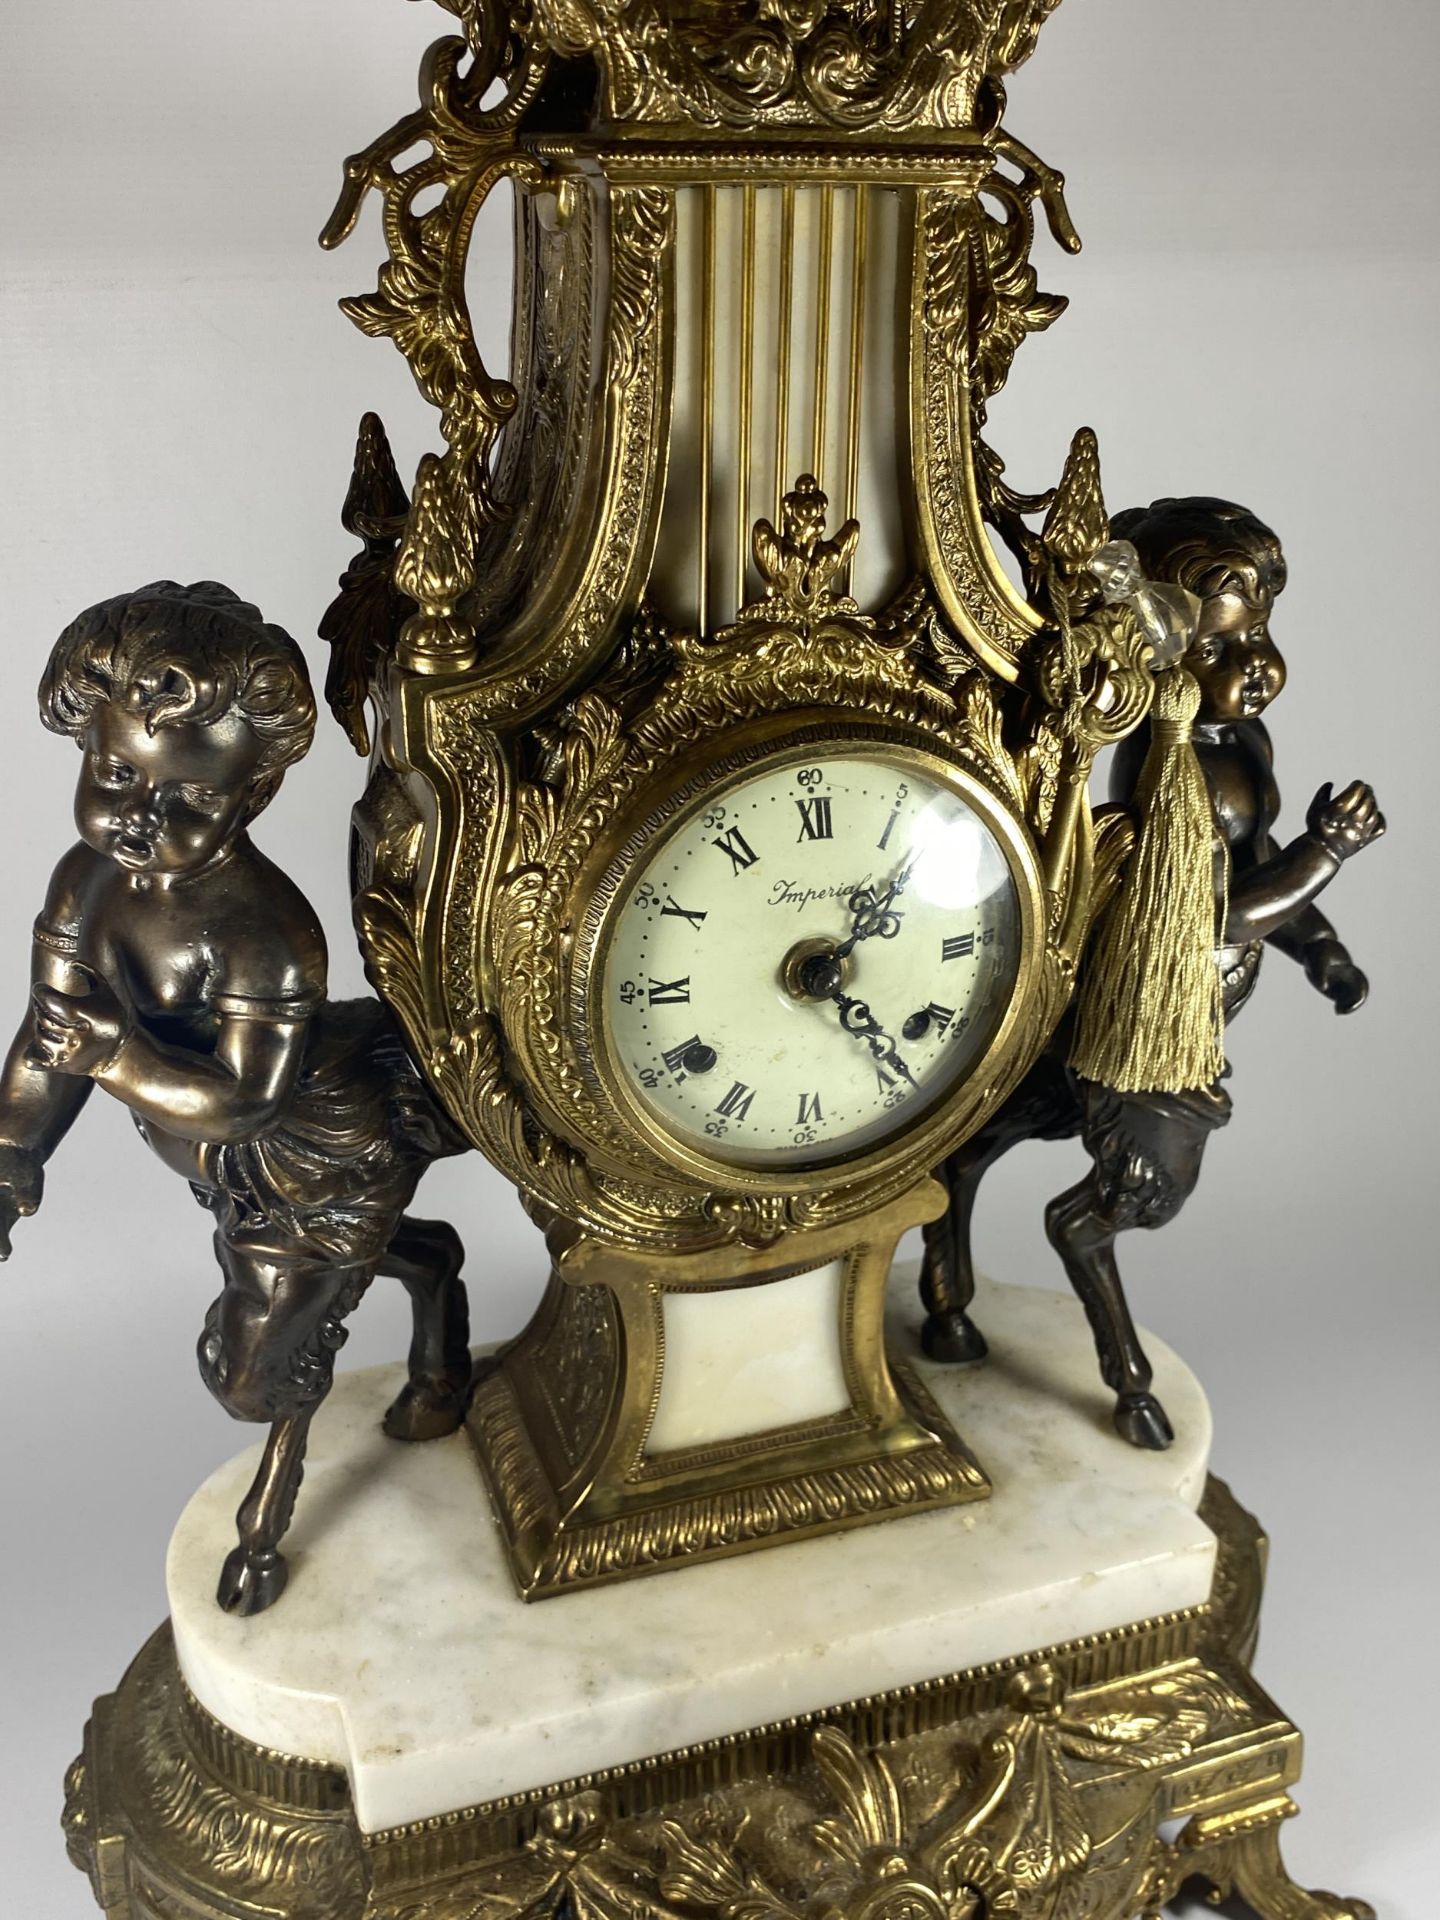 A C.1900 ITALIAN REPRODUCTION MANTLE CLOCK BY IMPERIAL IN BRASS WITH MARBLE BASE AND CHERUBS, HEIGHT - Image 2 of 5